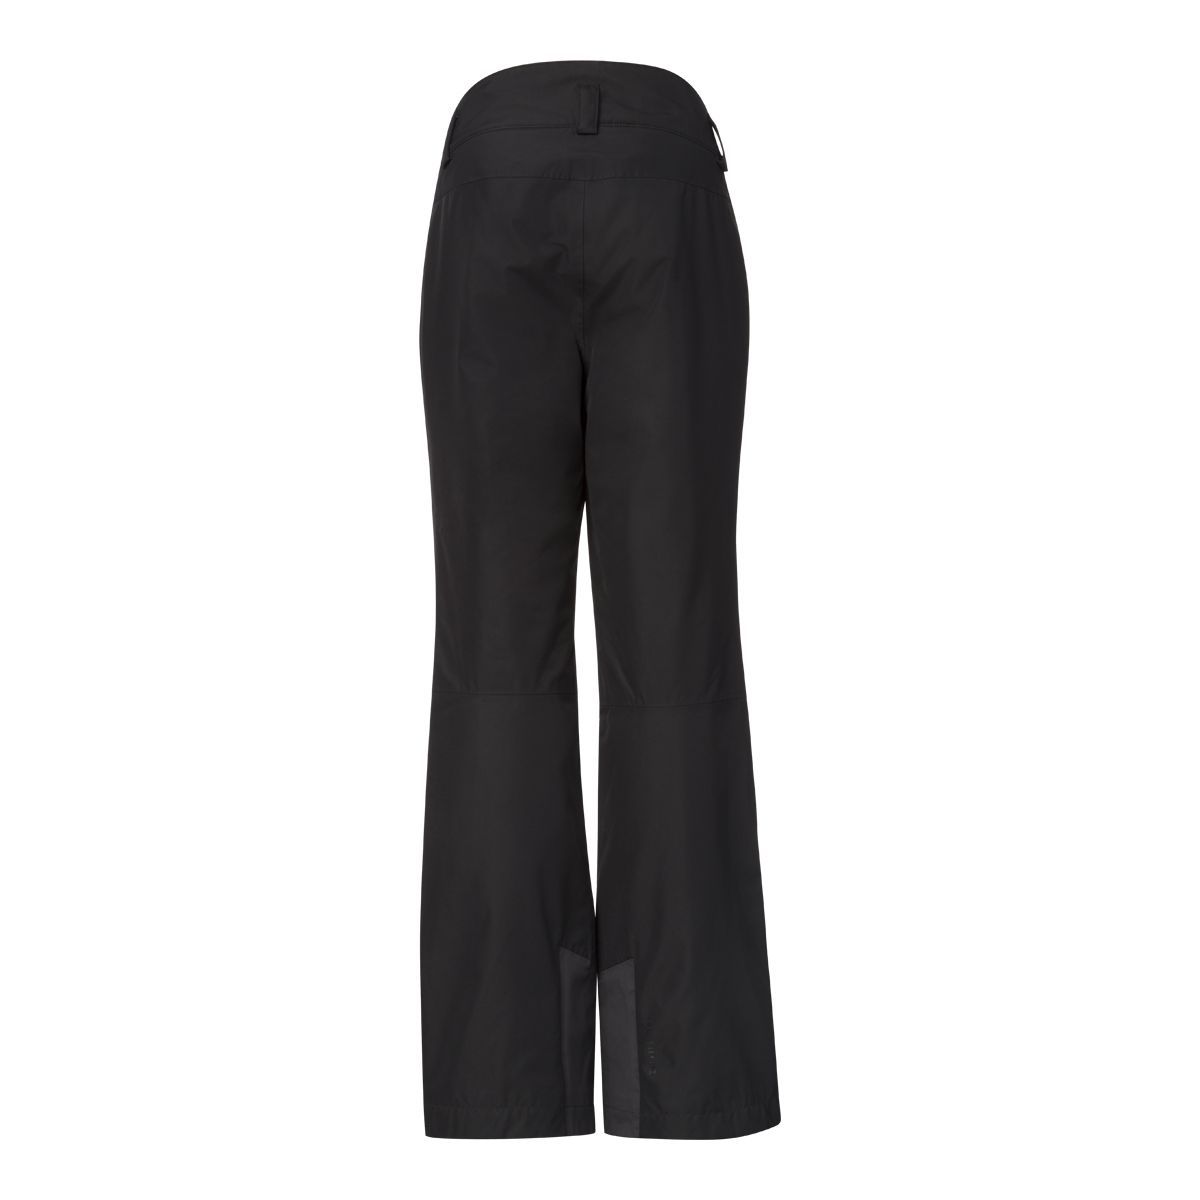 Buy Gerry Womens Ski Pants Insulated Water Resistant Fleece Lined Womens  Snow Pants Black XSmall at